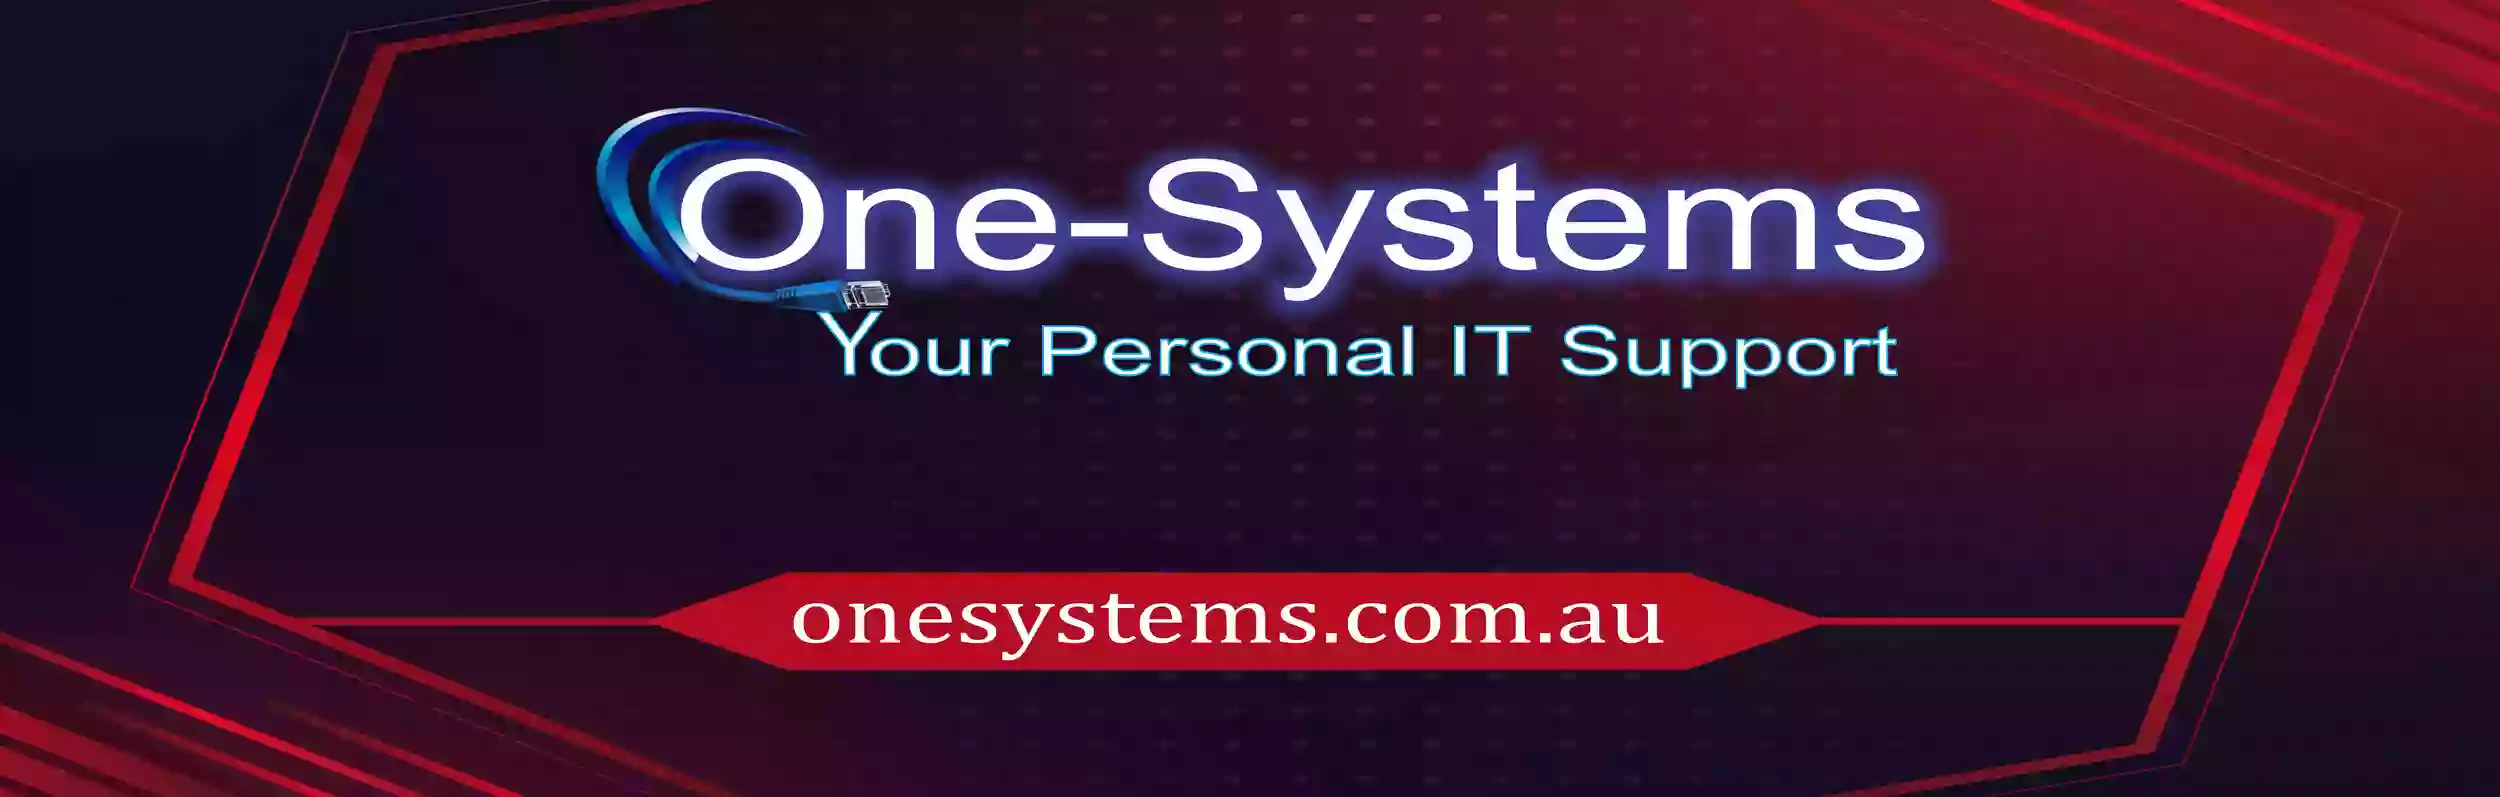 One-Systems - Computer and Phone Repair